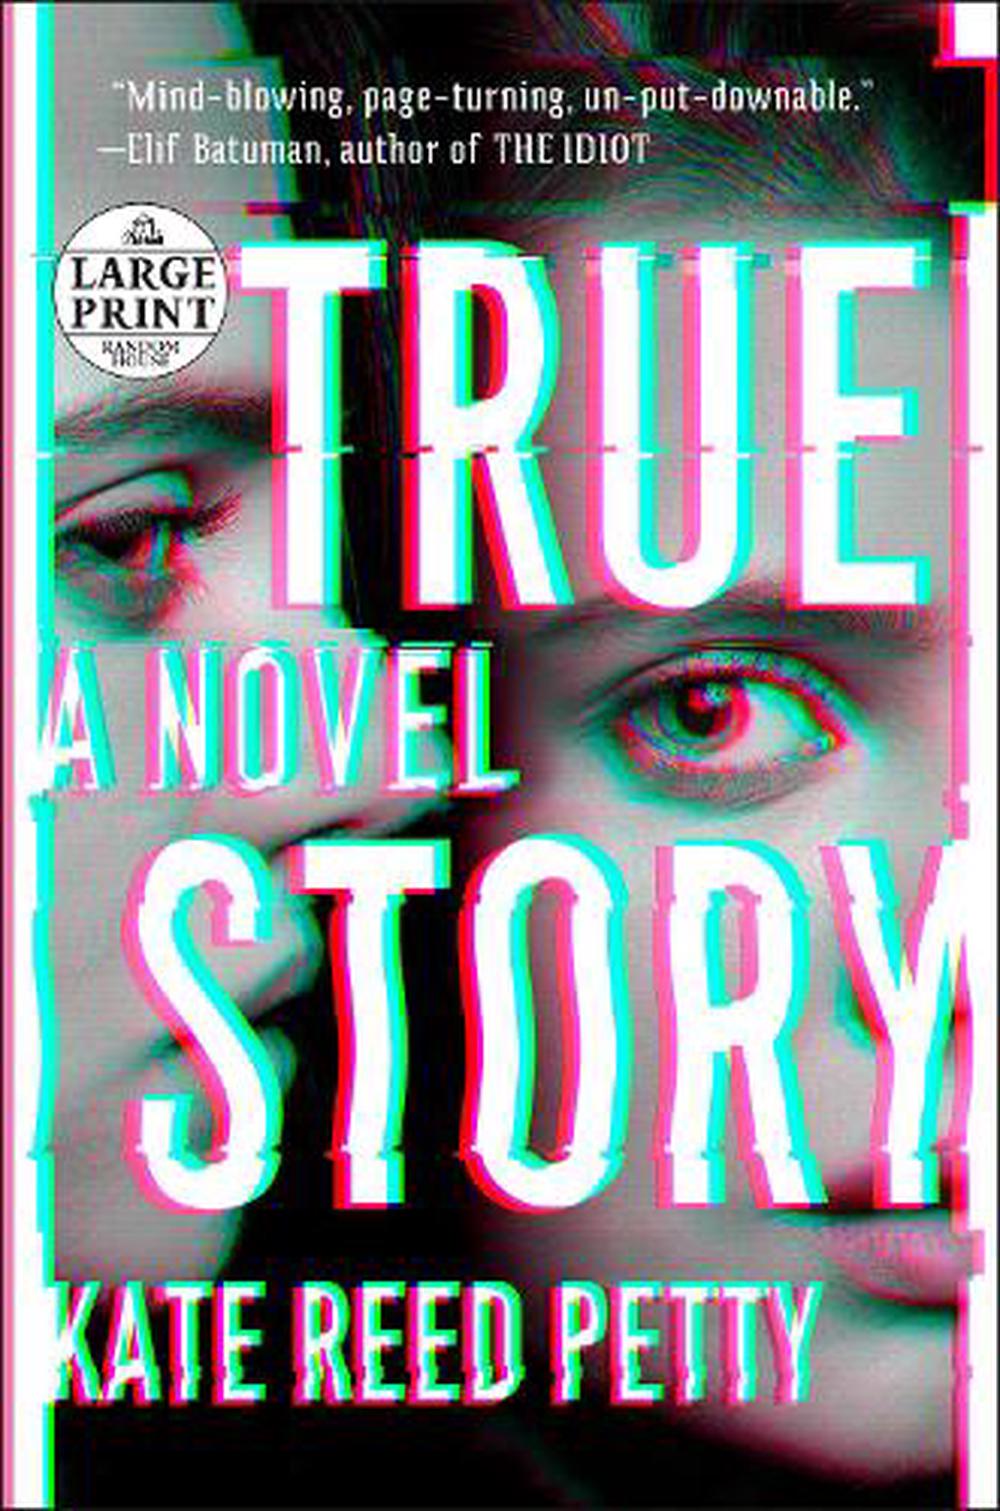 True Story a Novel by Kate Reed Petty (English) Paperback Book Free Shipping! 9780593286111 eBay